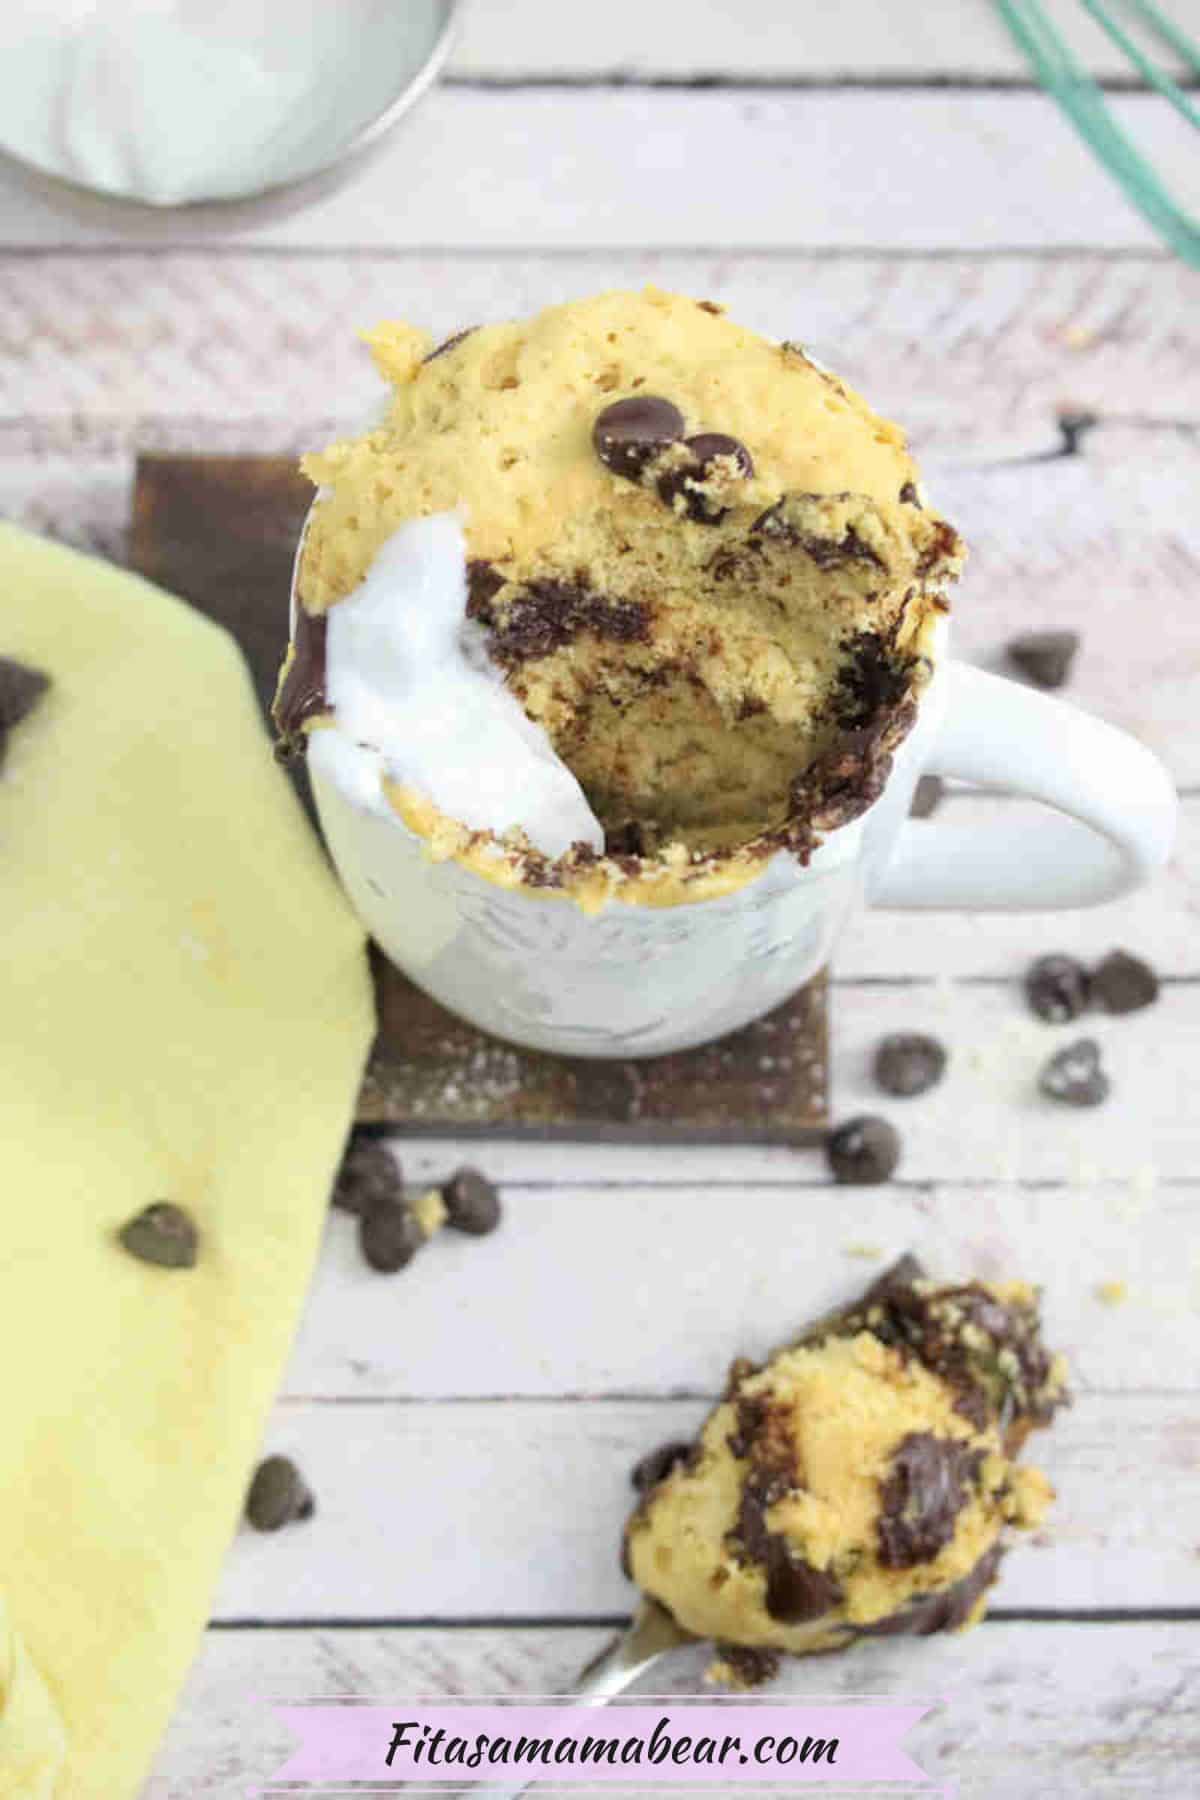 Chocolate chip mug cake with coconut cream in a white mug on a dark coasted with a yellow linen by it.